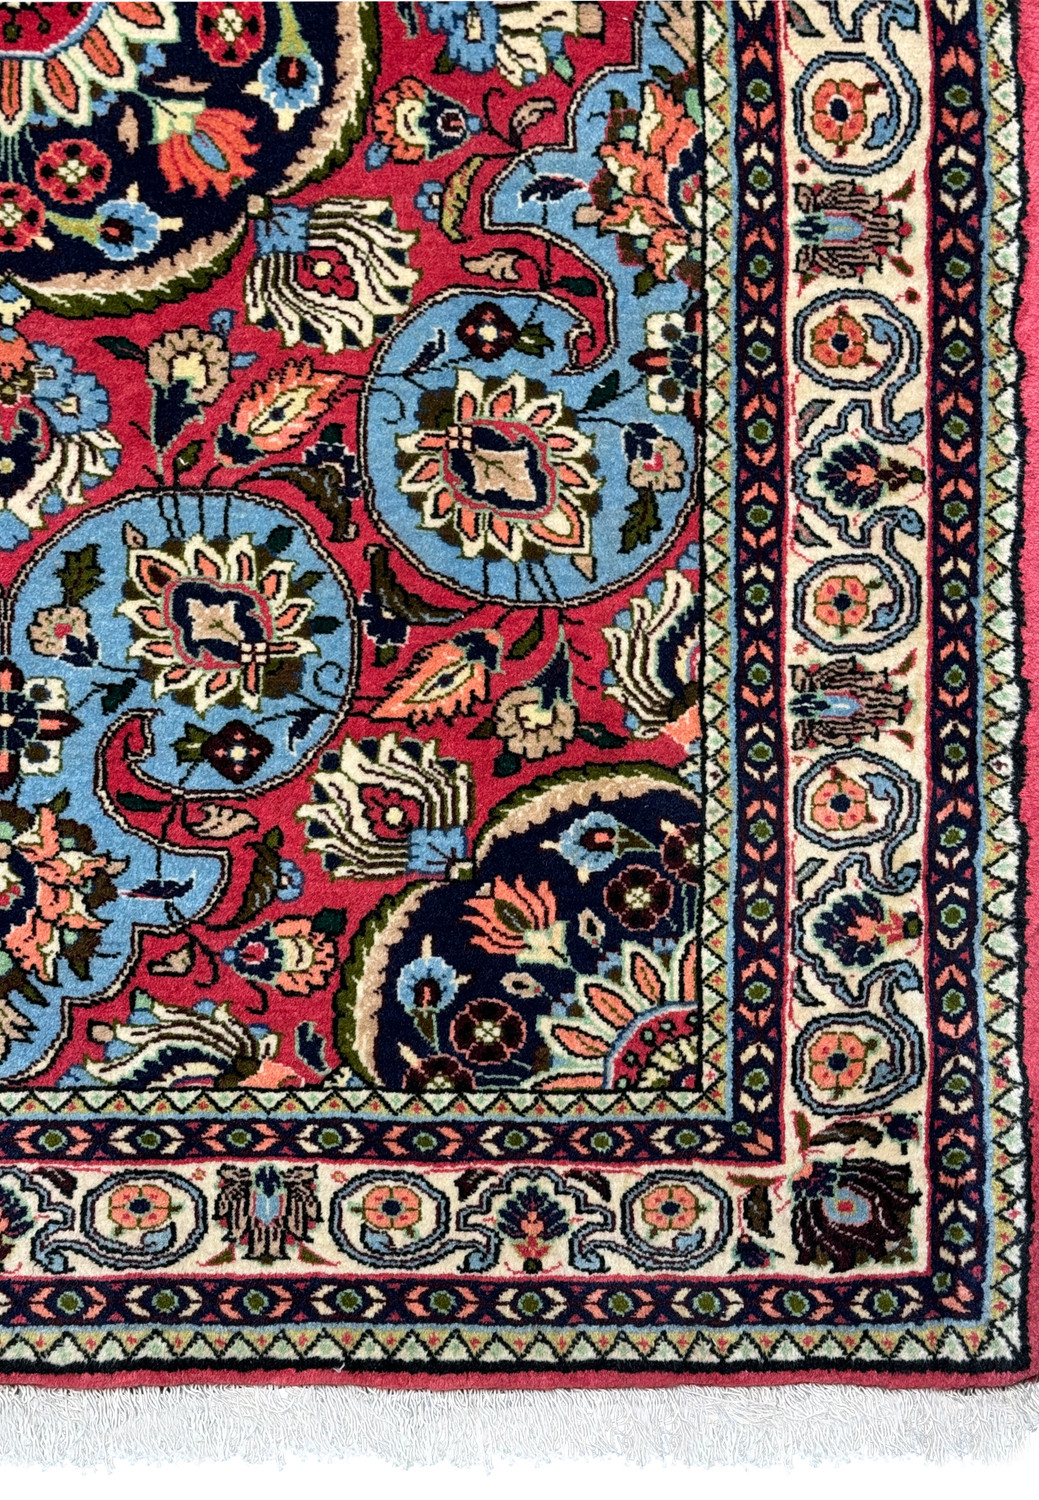 Close-up of a Persian Bijar rug's edge and fringe detailing the precision of the weave and the high-quality finish, characteristic of authentic Persian wool rug